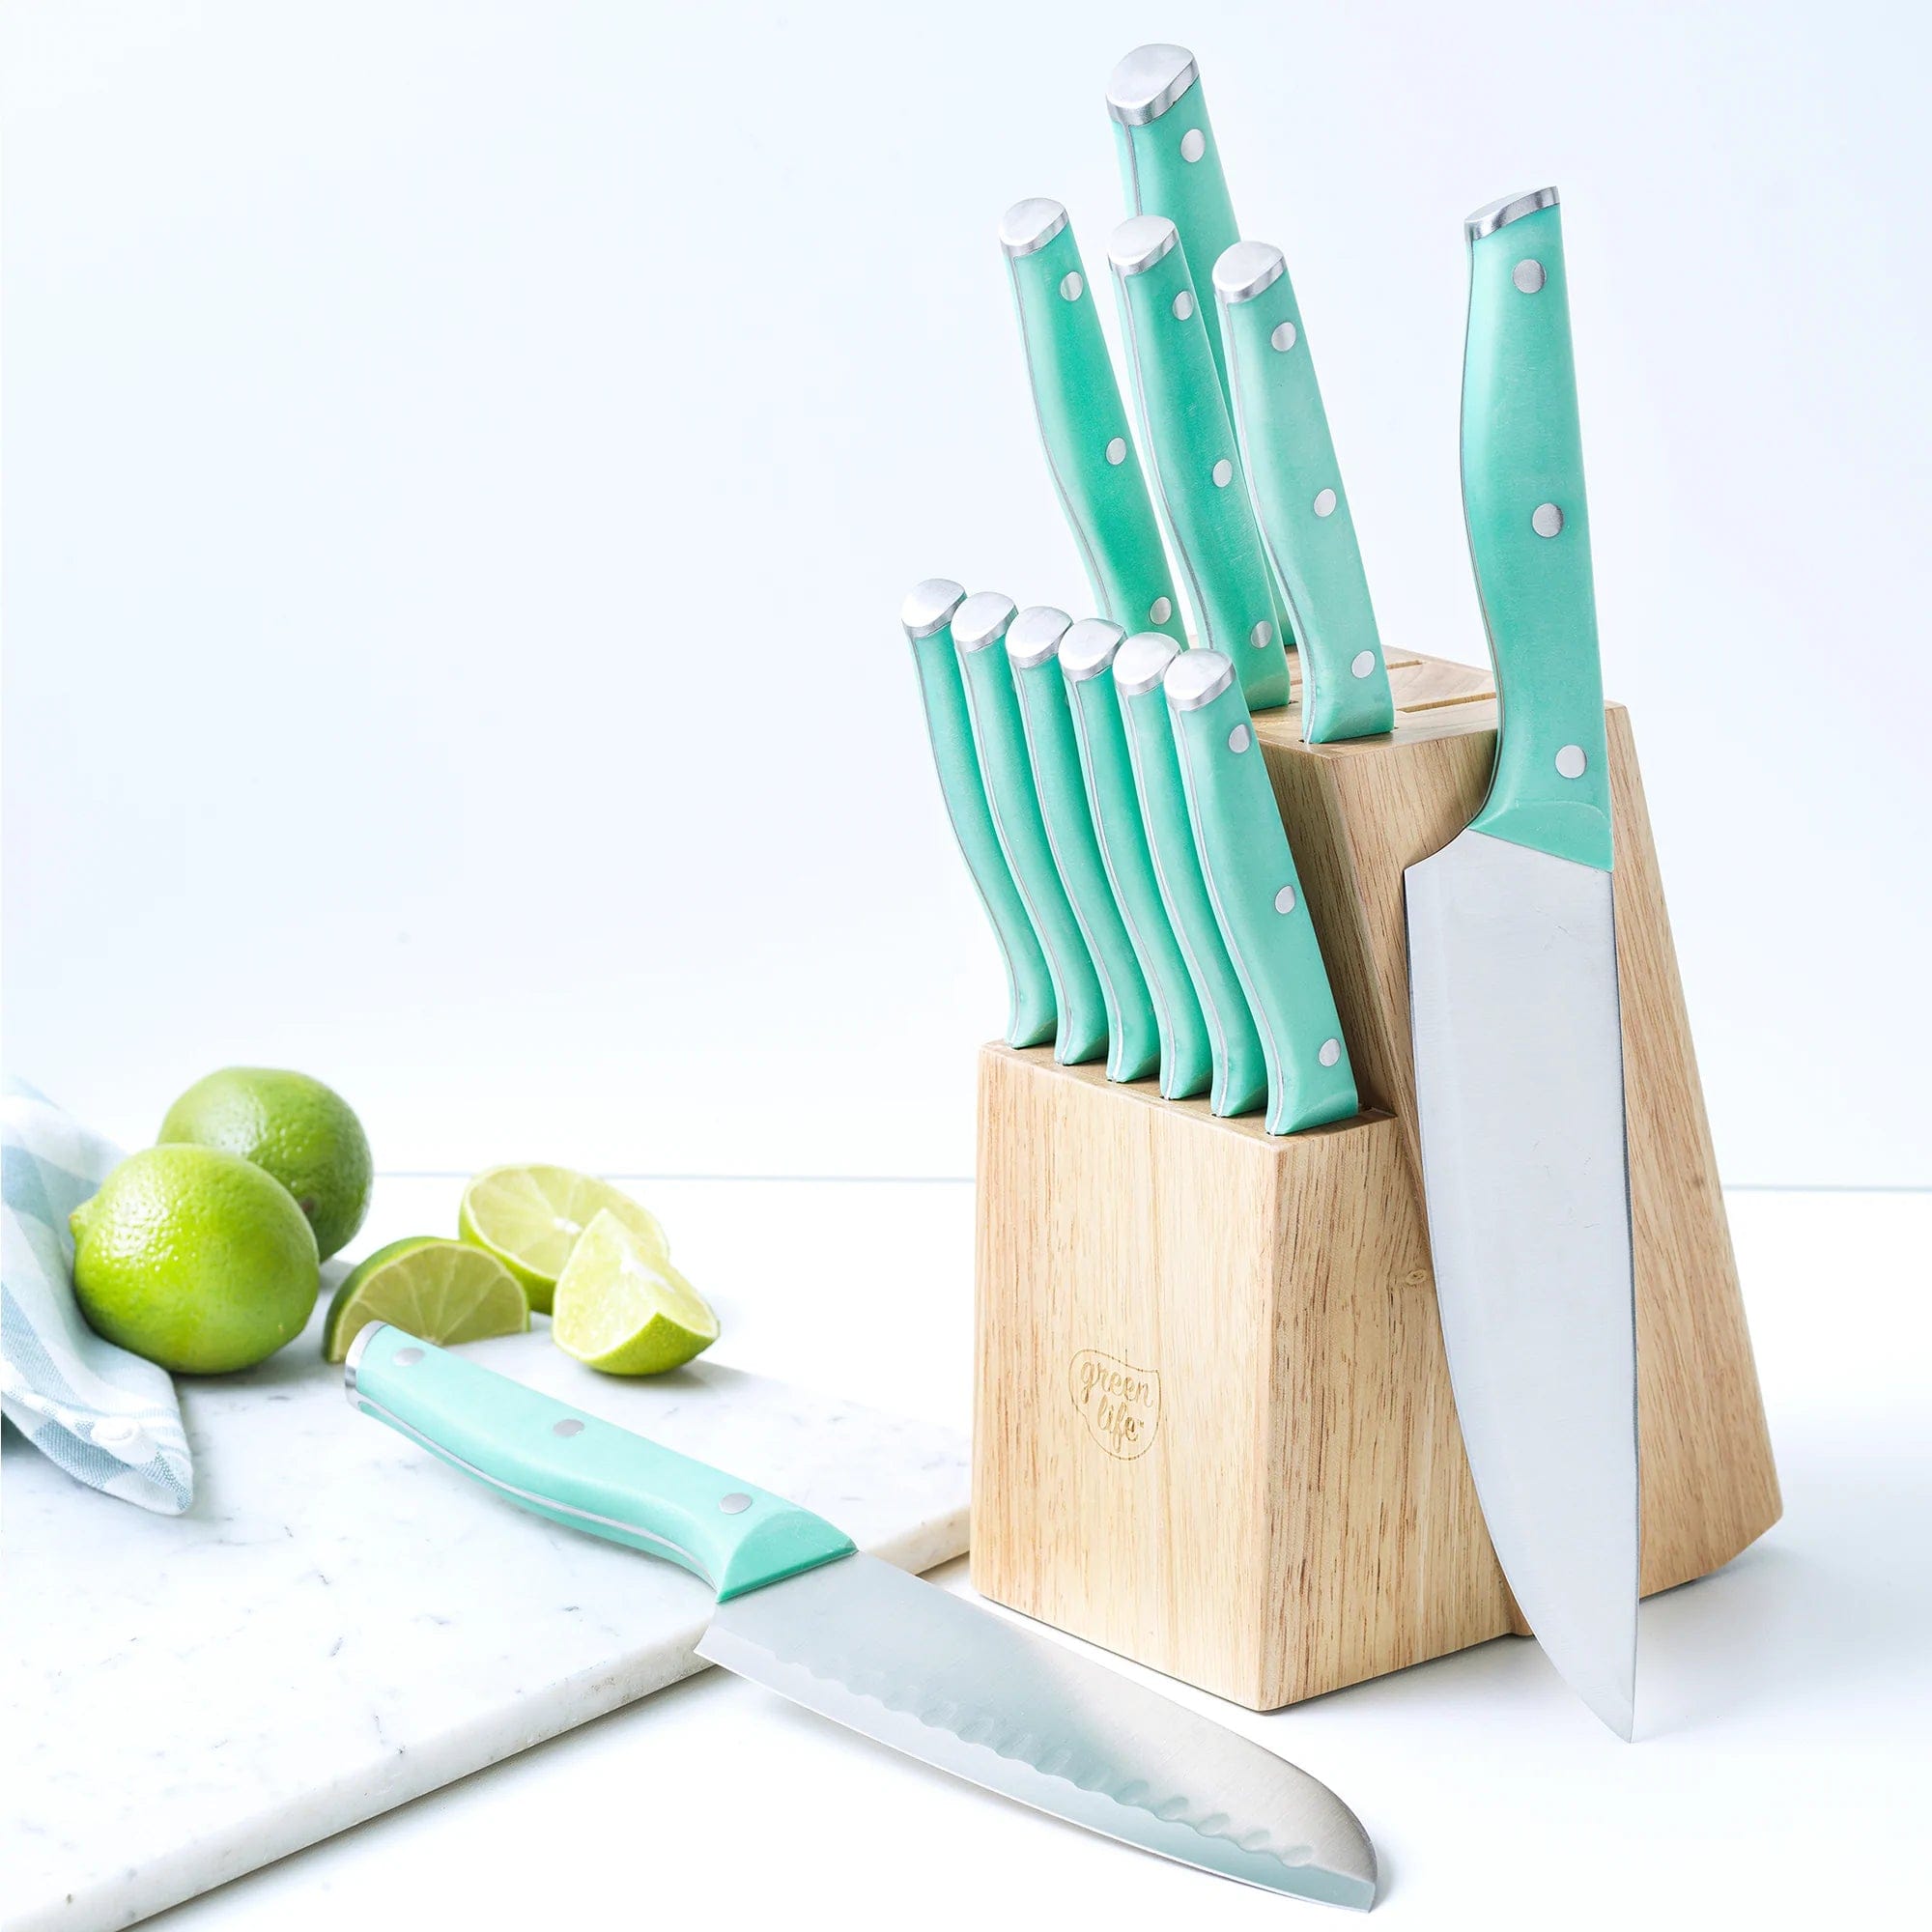 GreenLife Stainless Steel 5-Piece Cutlery Set